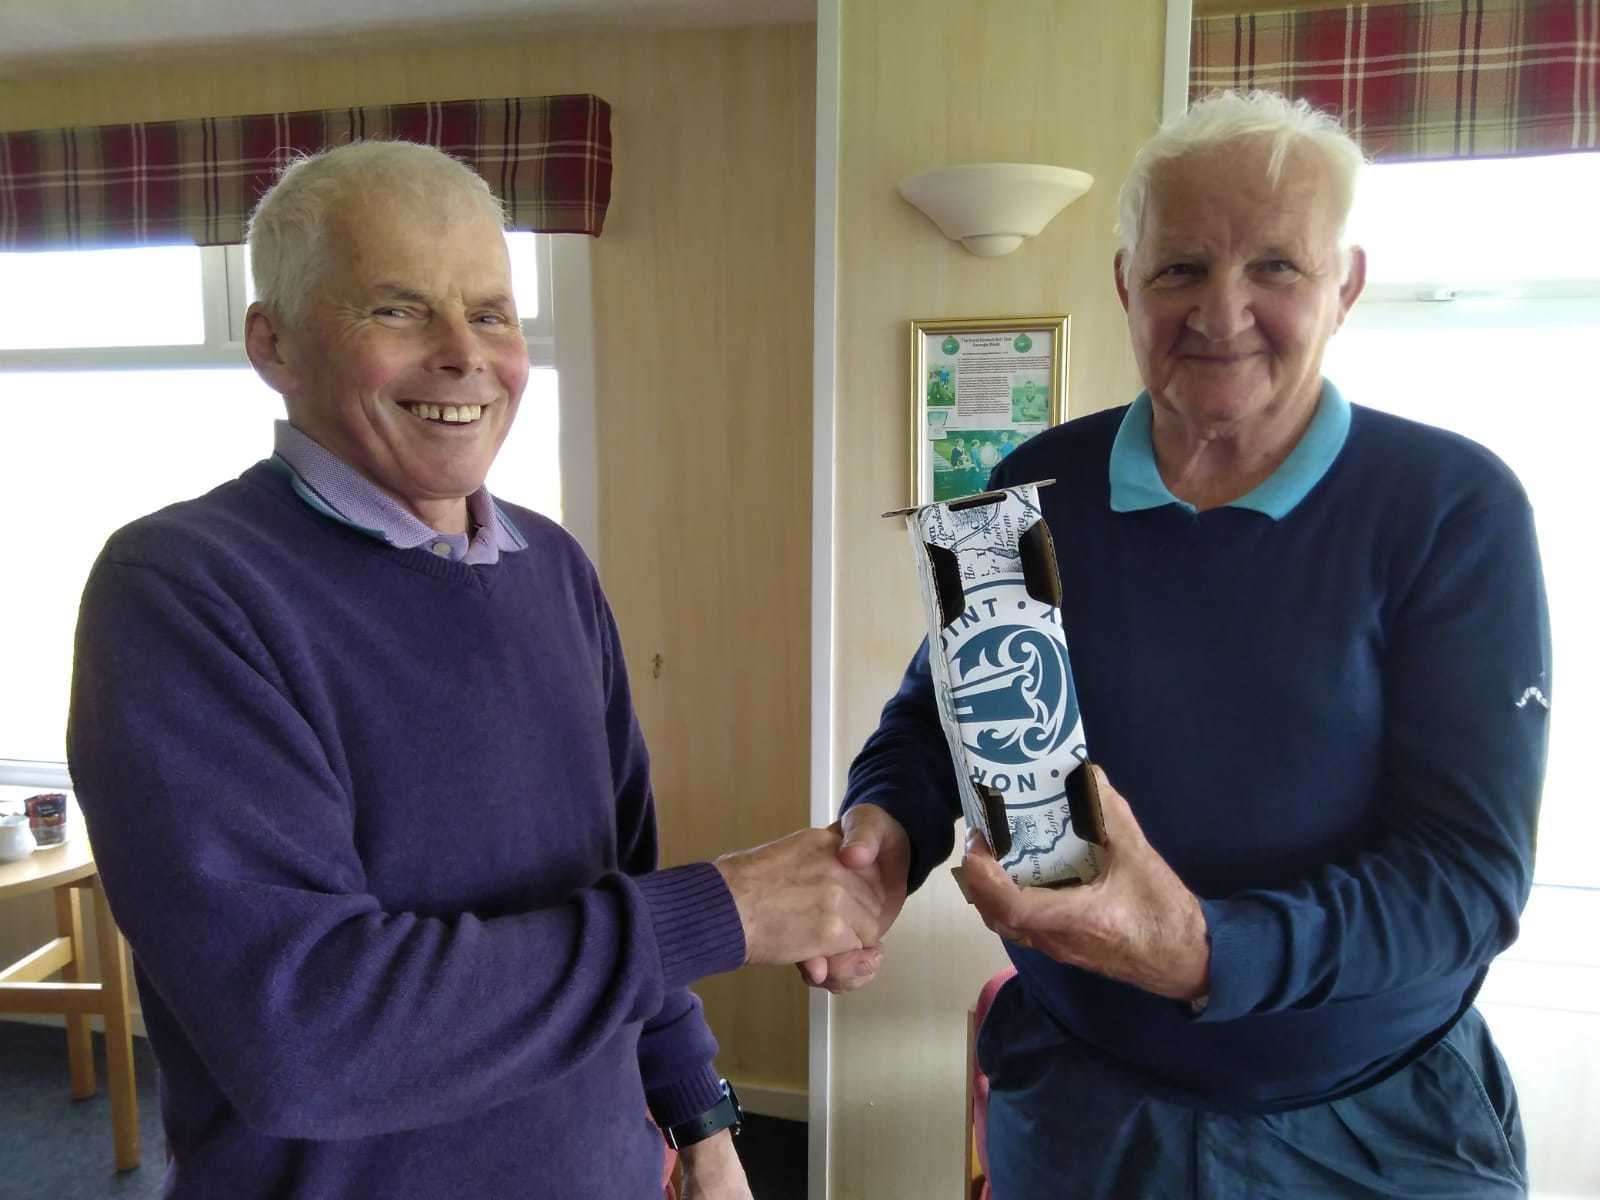 Kenny Farmer Snr (right) receiving a bottle of North Point rum from Sandy Chisholm after winning the nearest-the-pin prize in the senior Stableford competition at Reay.